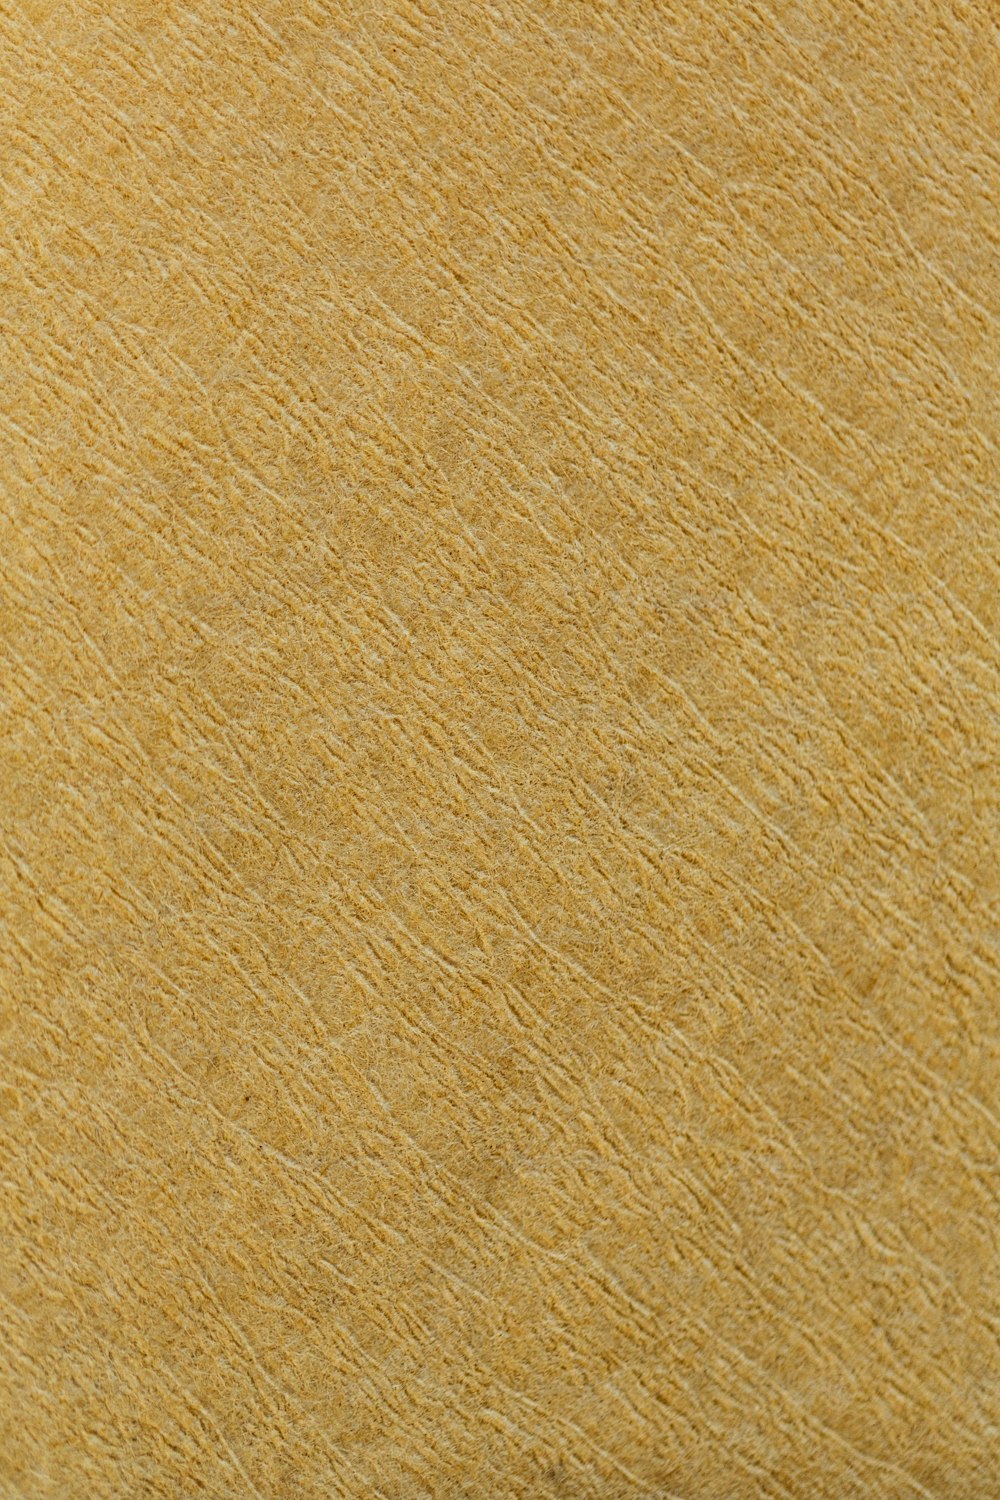 a close up view of a yellow textured surface